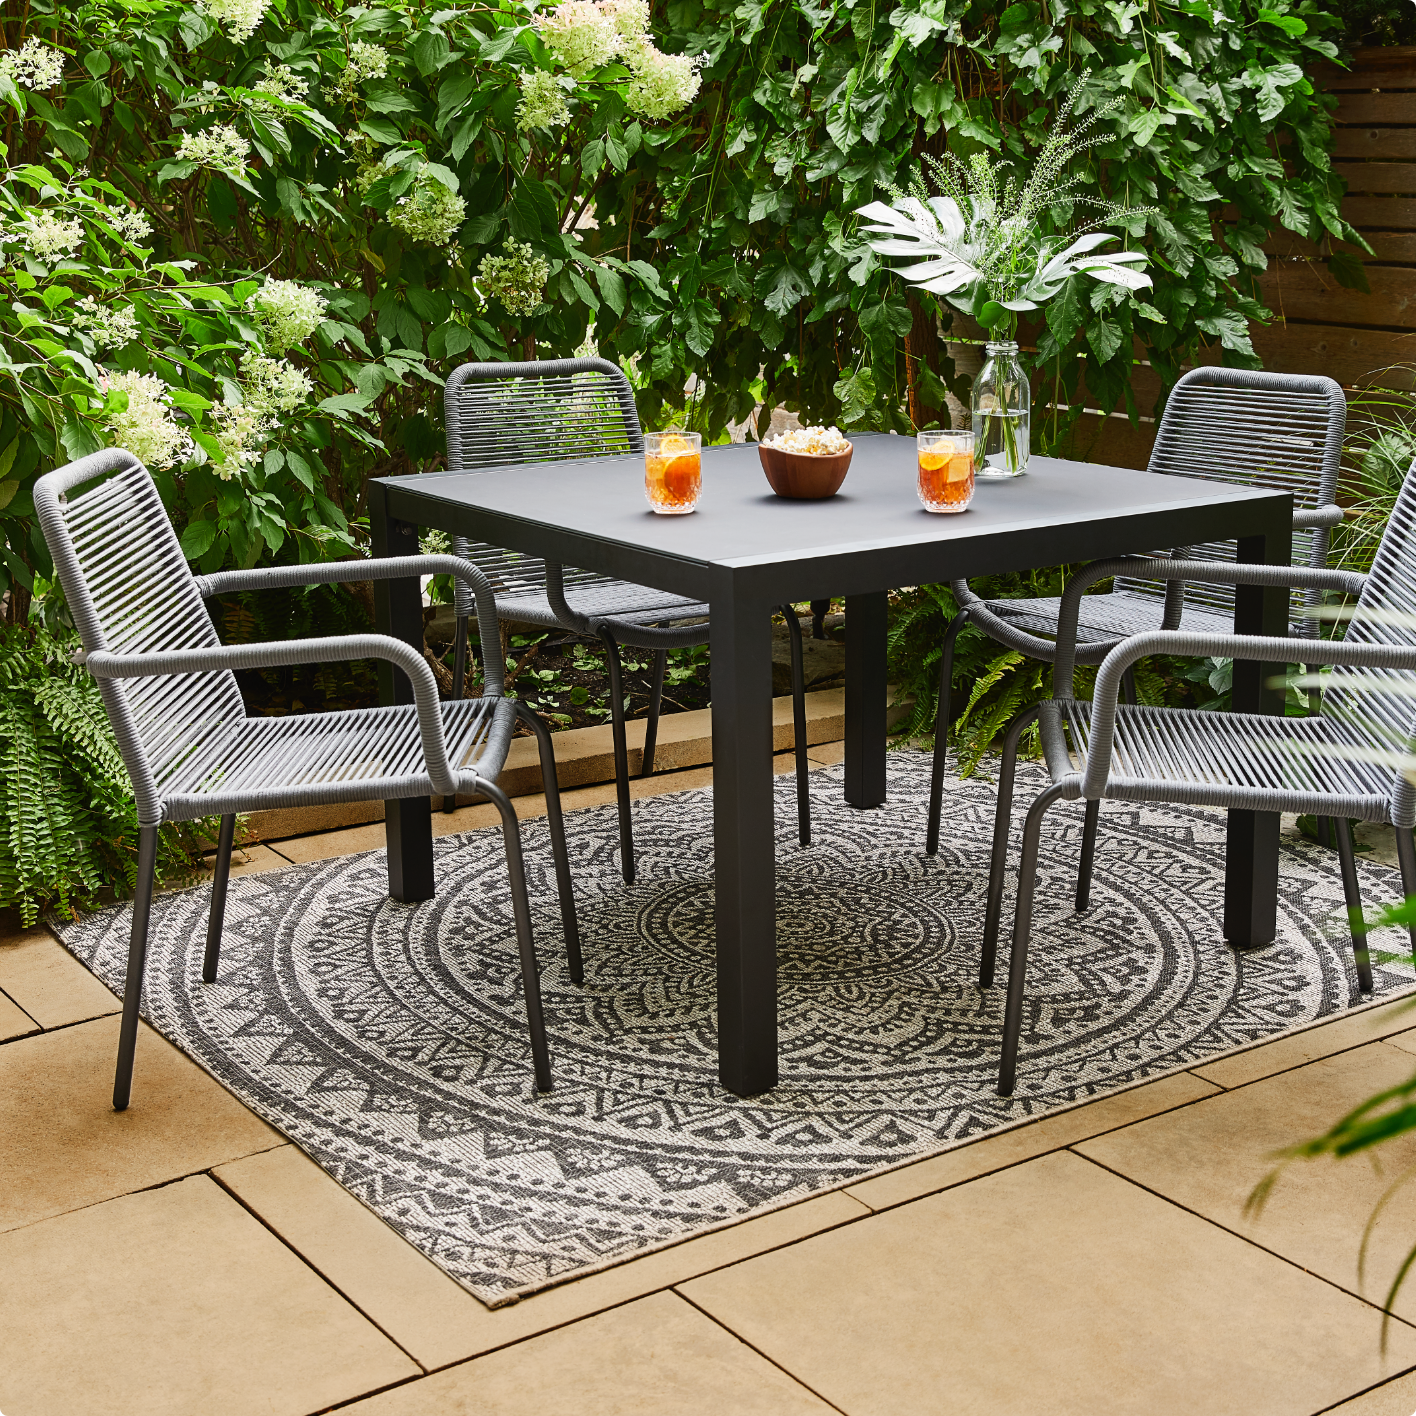 A smaller black outdoor dining table with some drinks on top, four grey wicker chairs surrounding it amidst a pleasant, secluded outdoor space. 